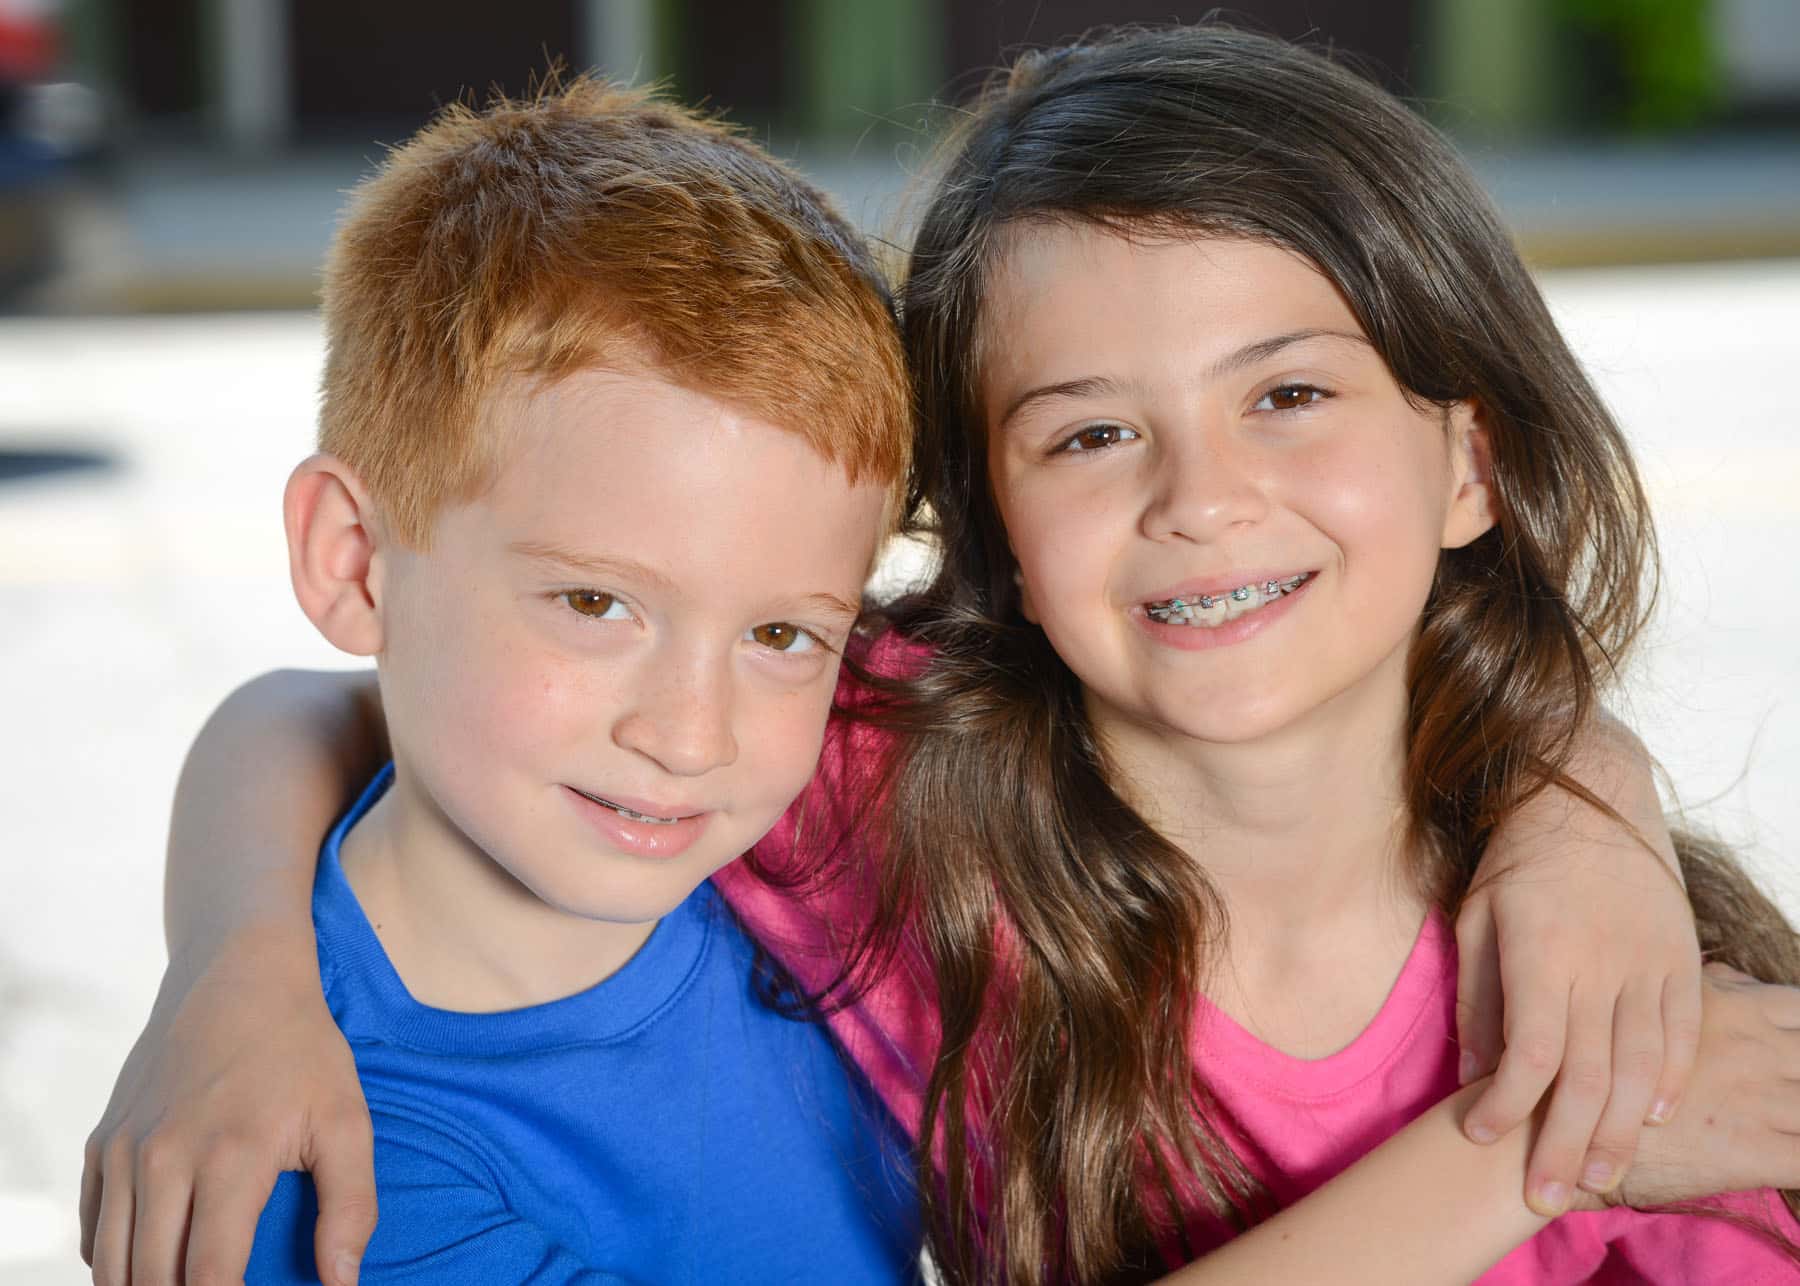 A young boy with red hair and braces embracing a young girl with brown hair and braces.